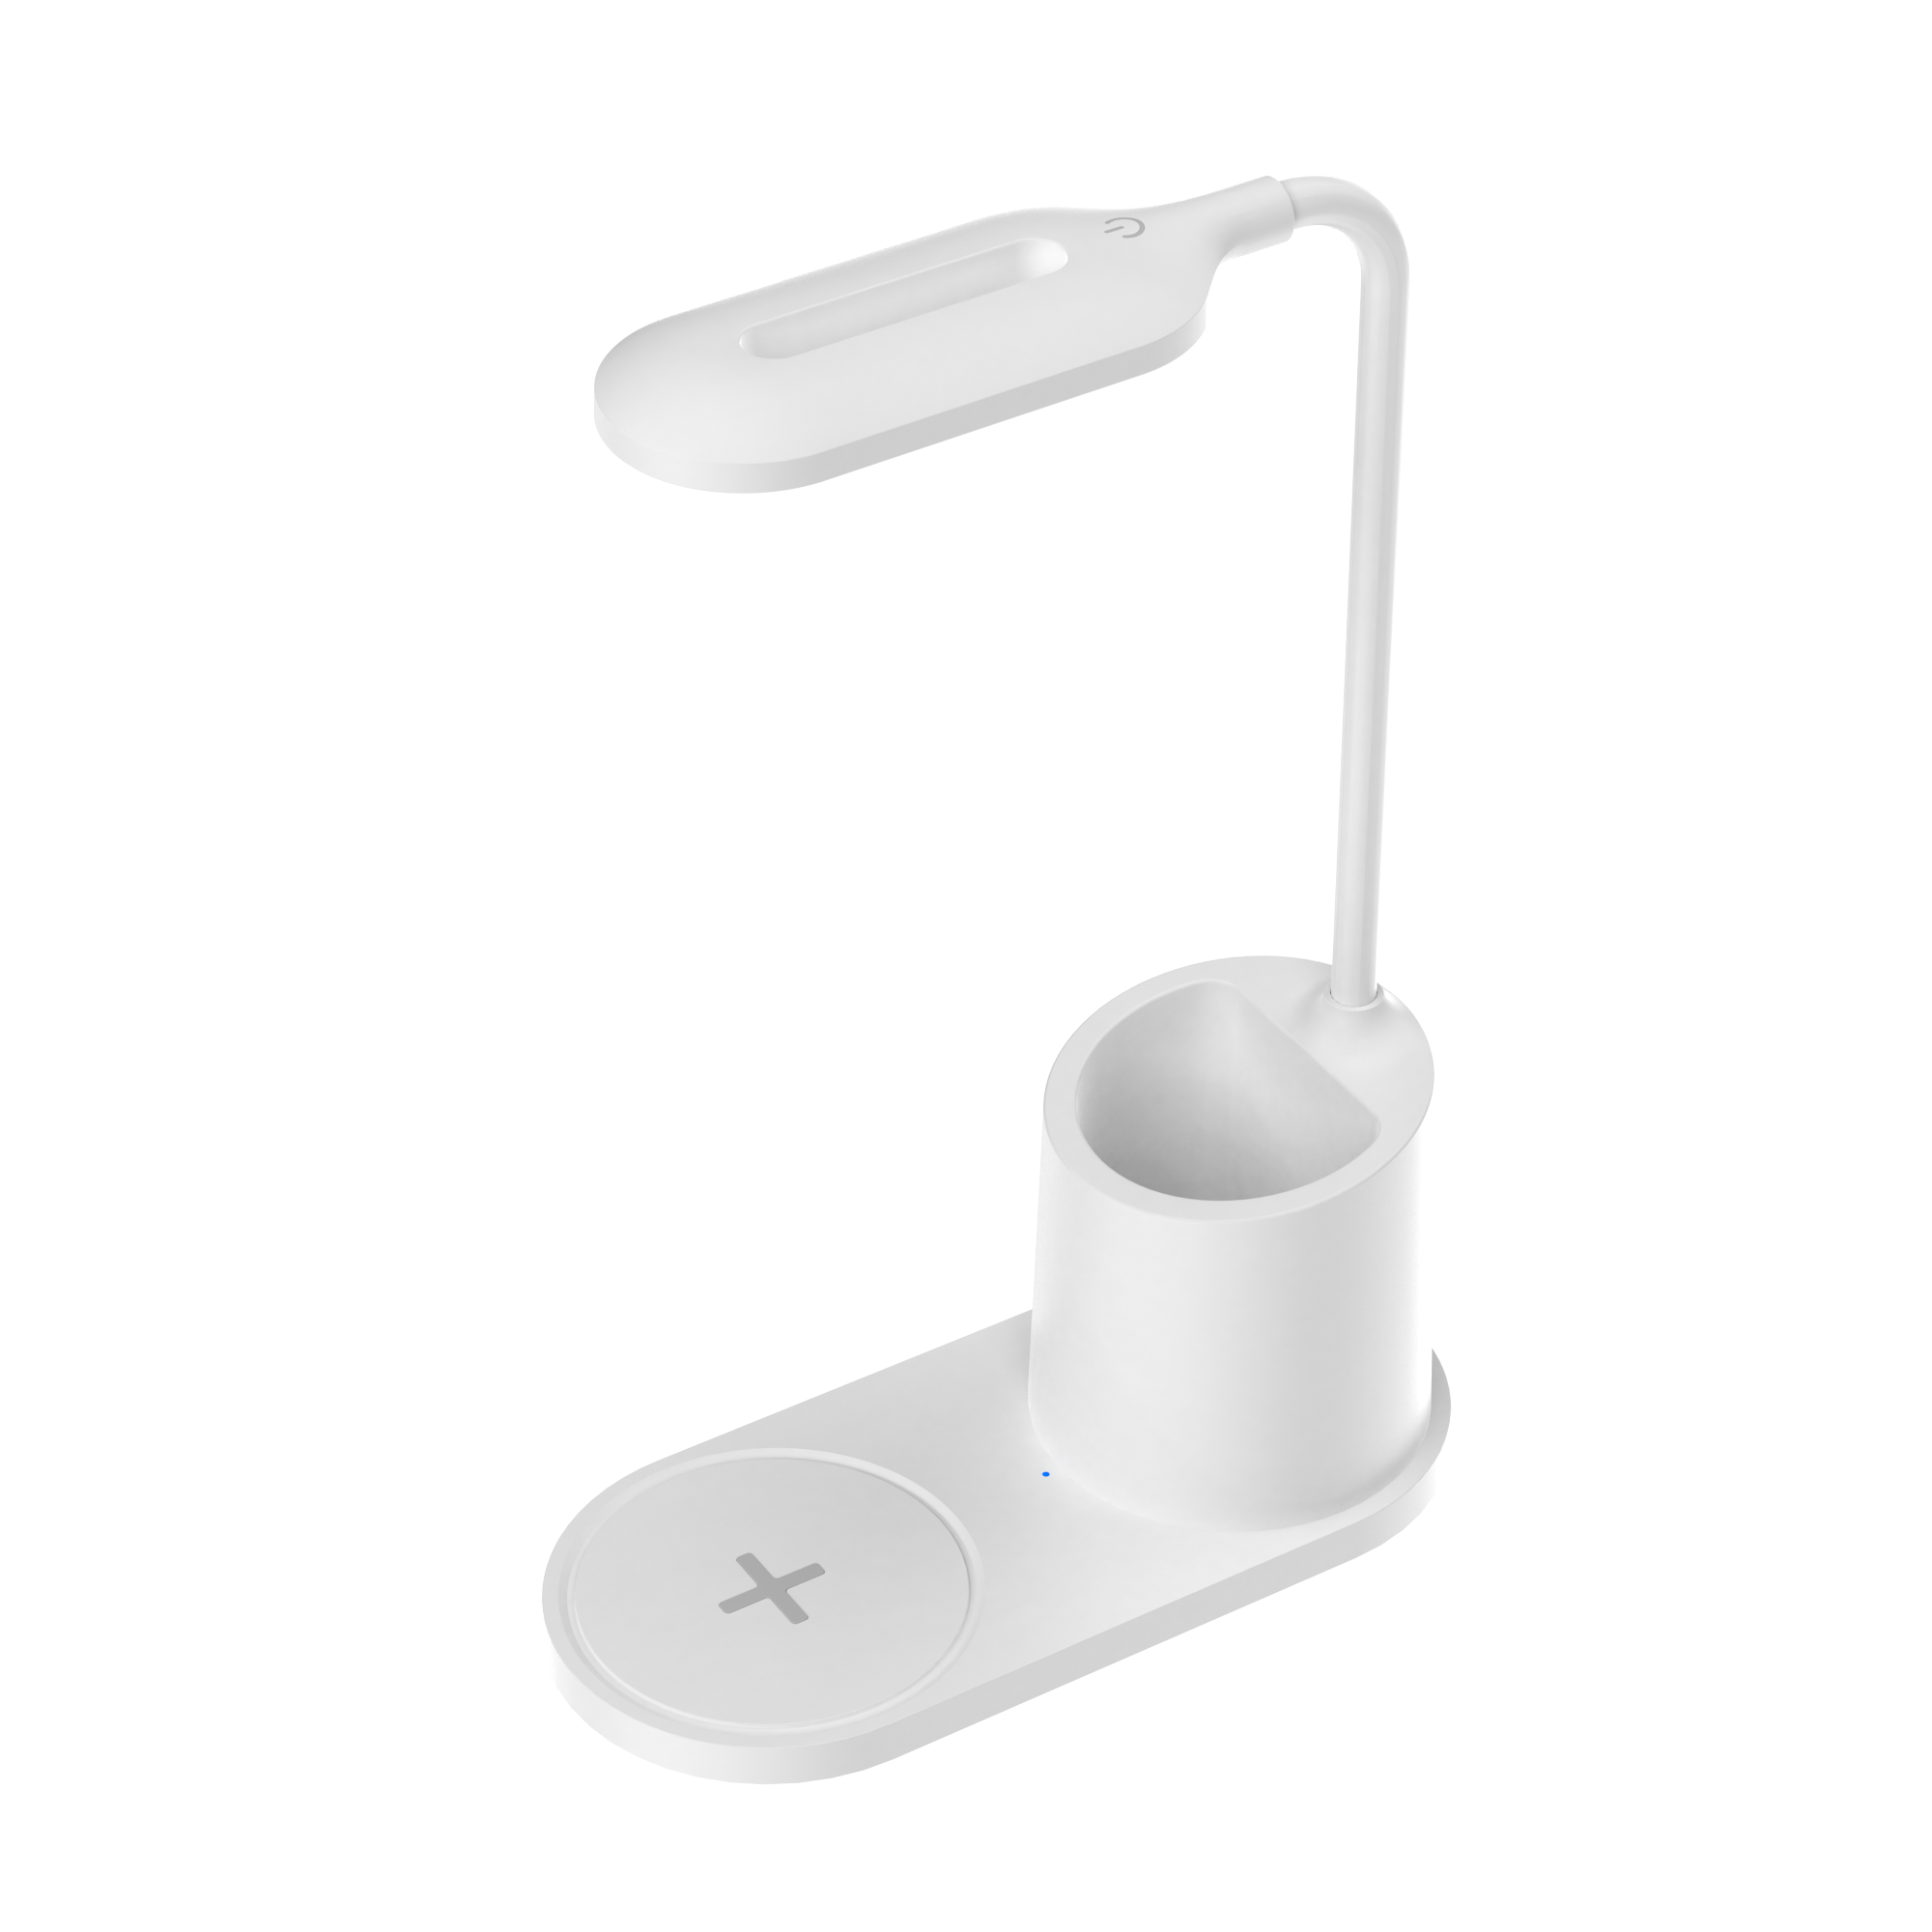 HHT513 New Wireless Charger Eye Protect Light USB Folding Wireless Charger Table Lamp Designer LED Table Lamp For Bedside Reading Room